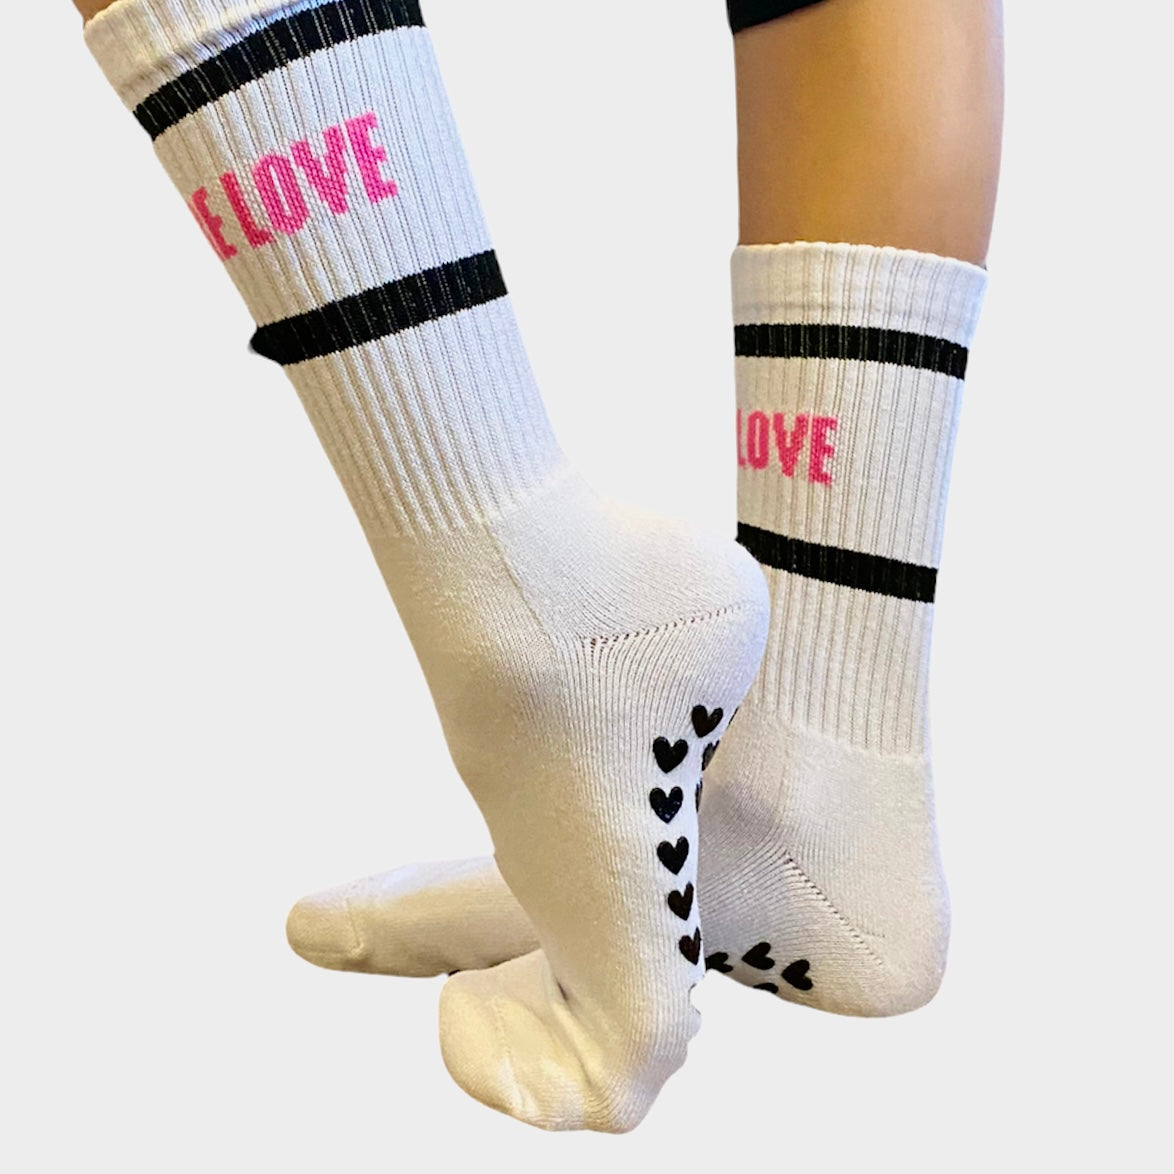 Arebesk Grip Socks and Fitness Apparel – Arebesk, Inc.